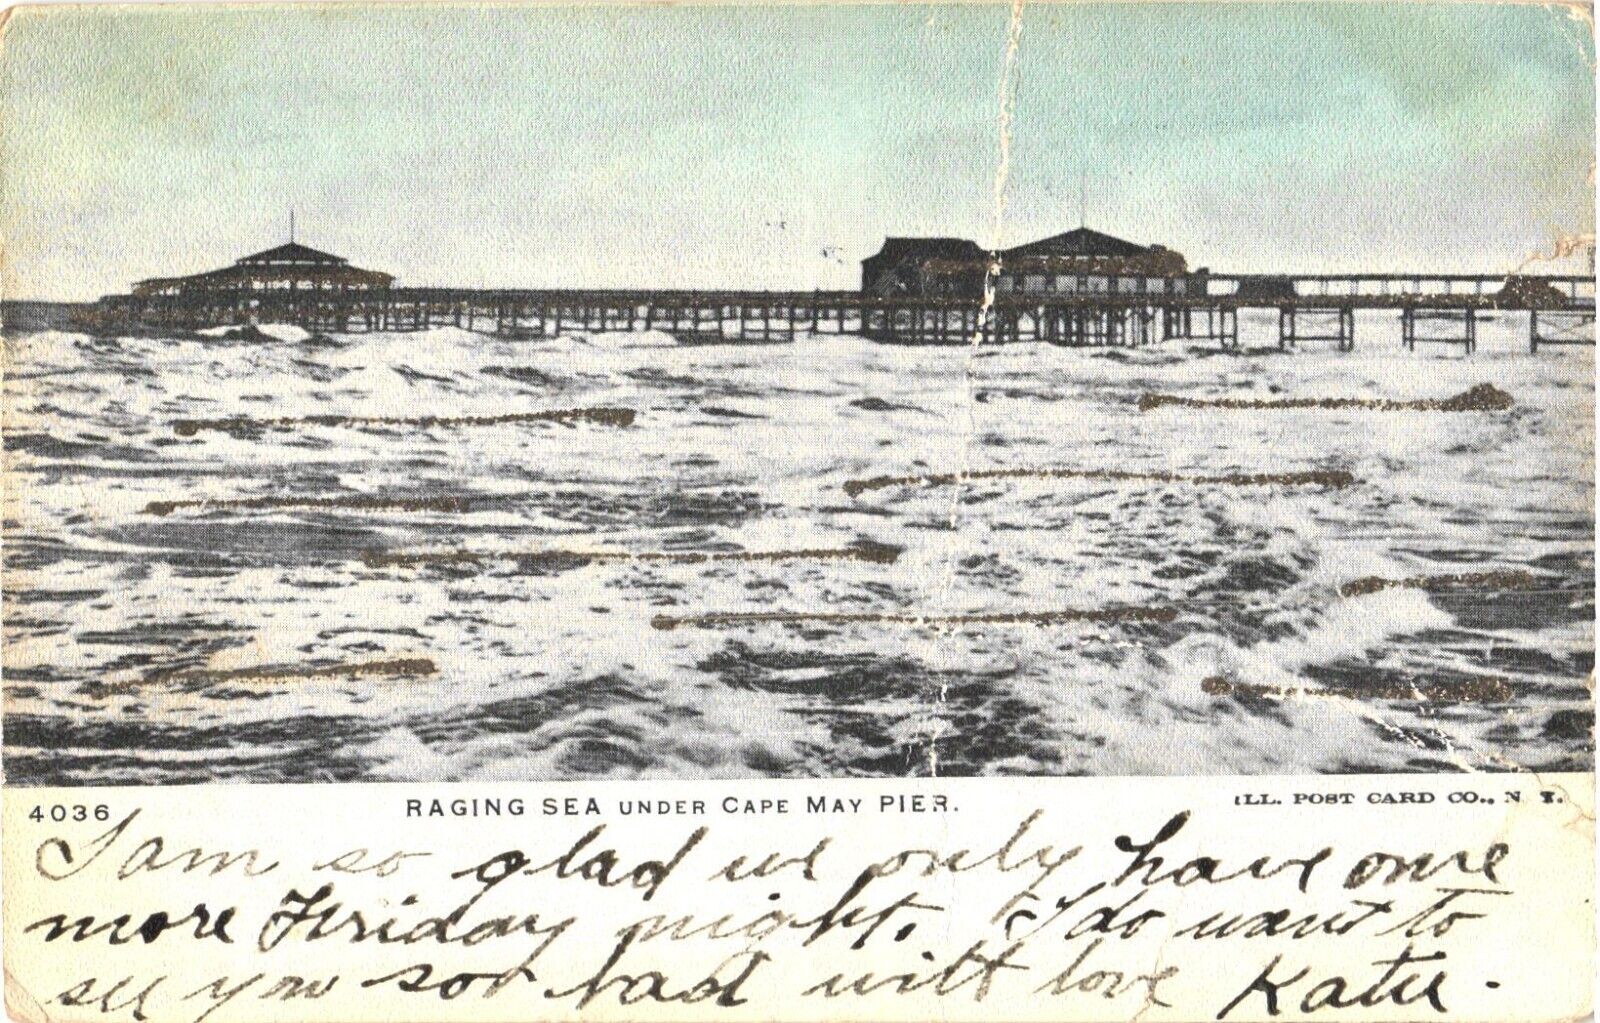 Panorama of Raging Sea Under Cape May Pier, New Jersey Postcard